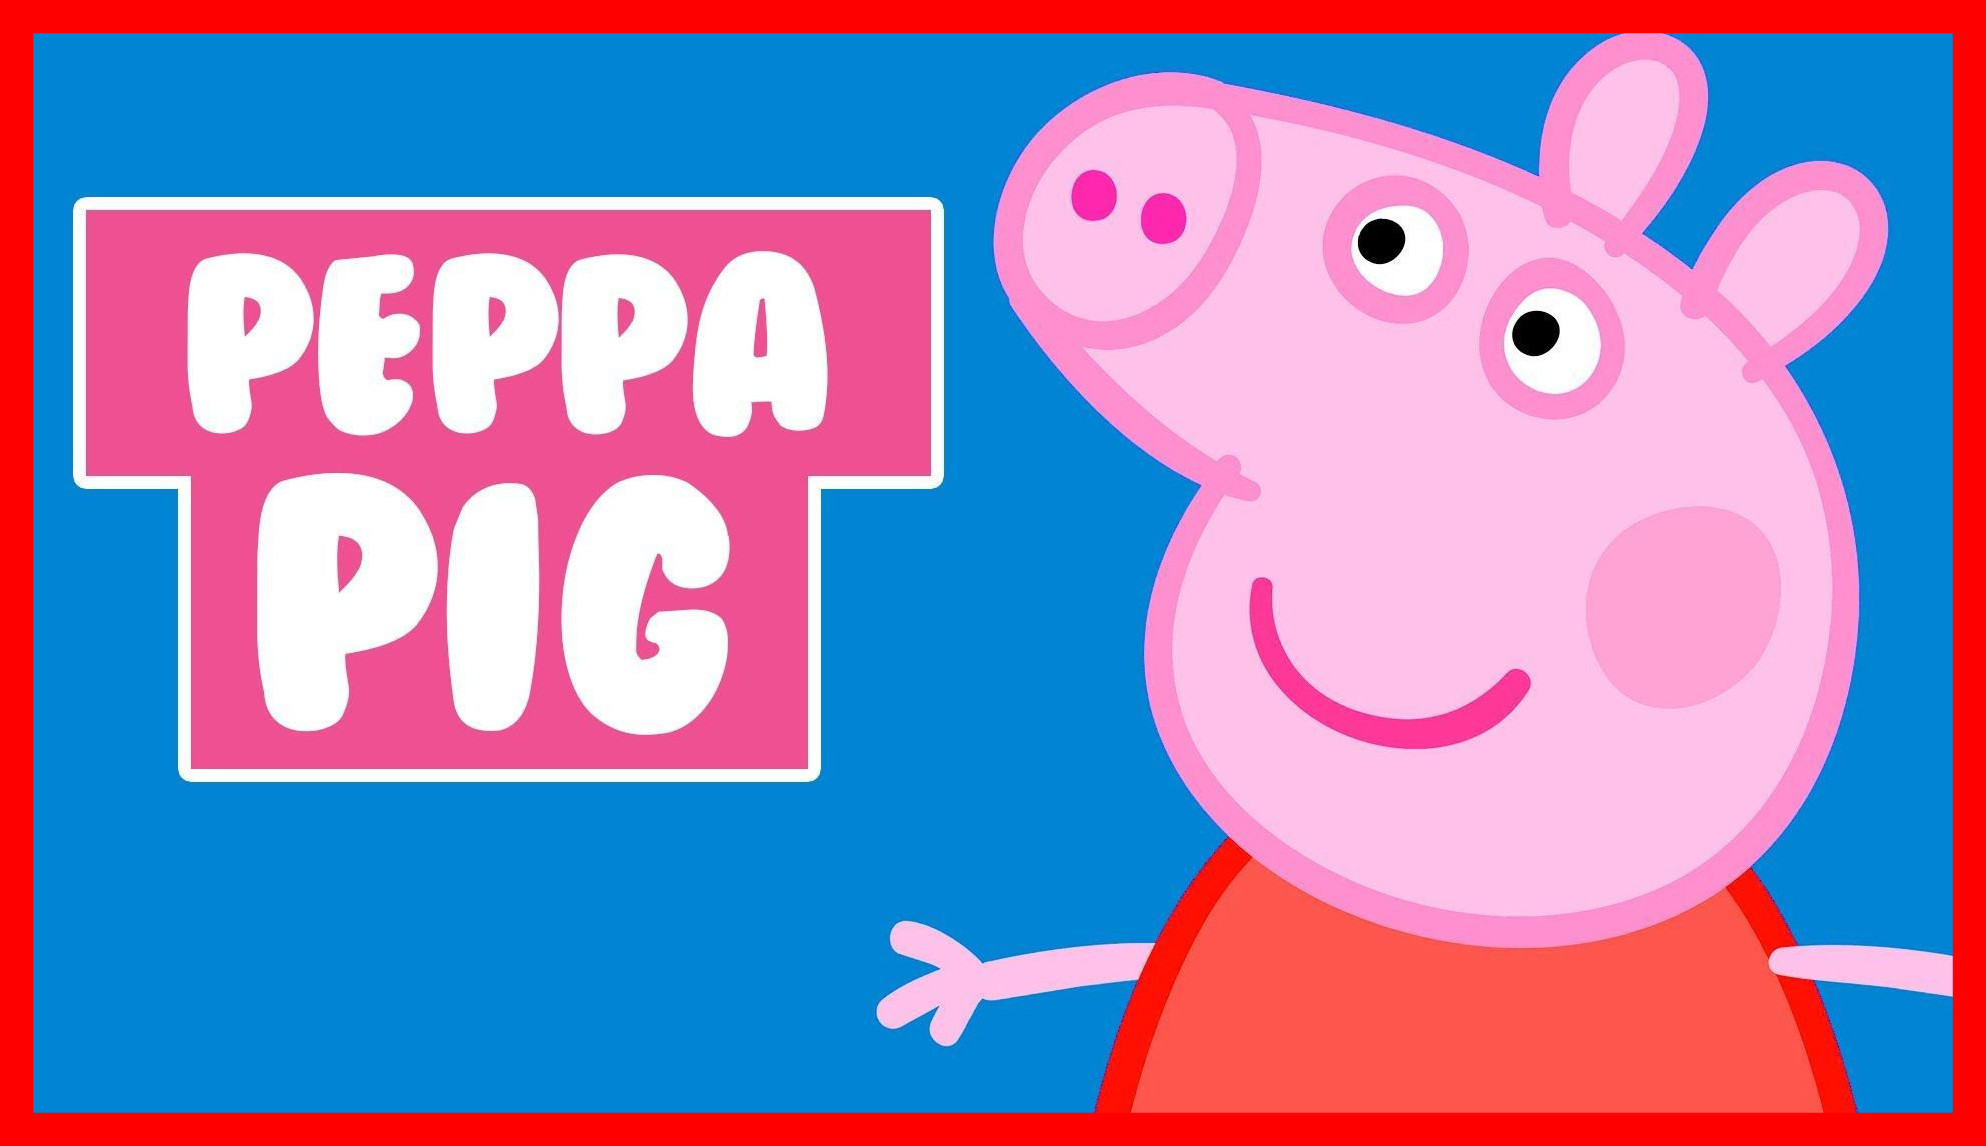 1986x1146 1920x1080 Cartoon Wallpapers. Download the following Peppa Pig .